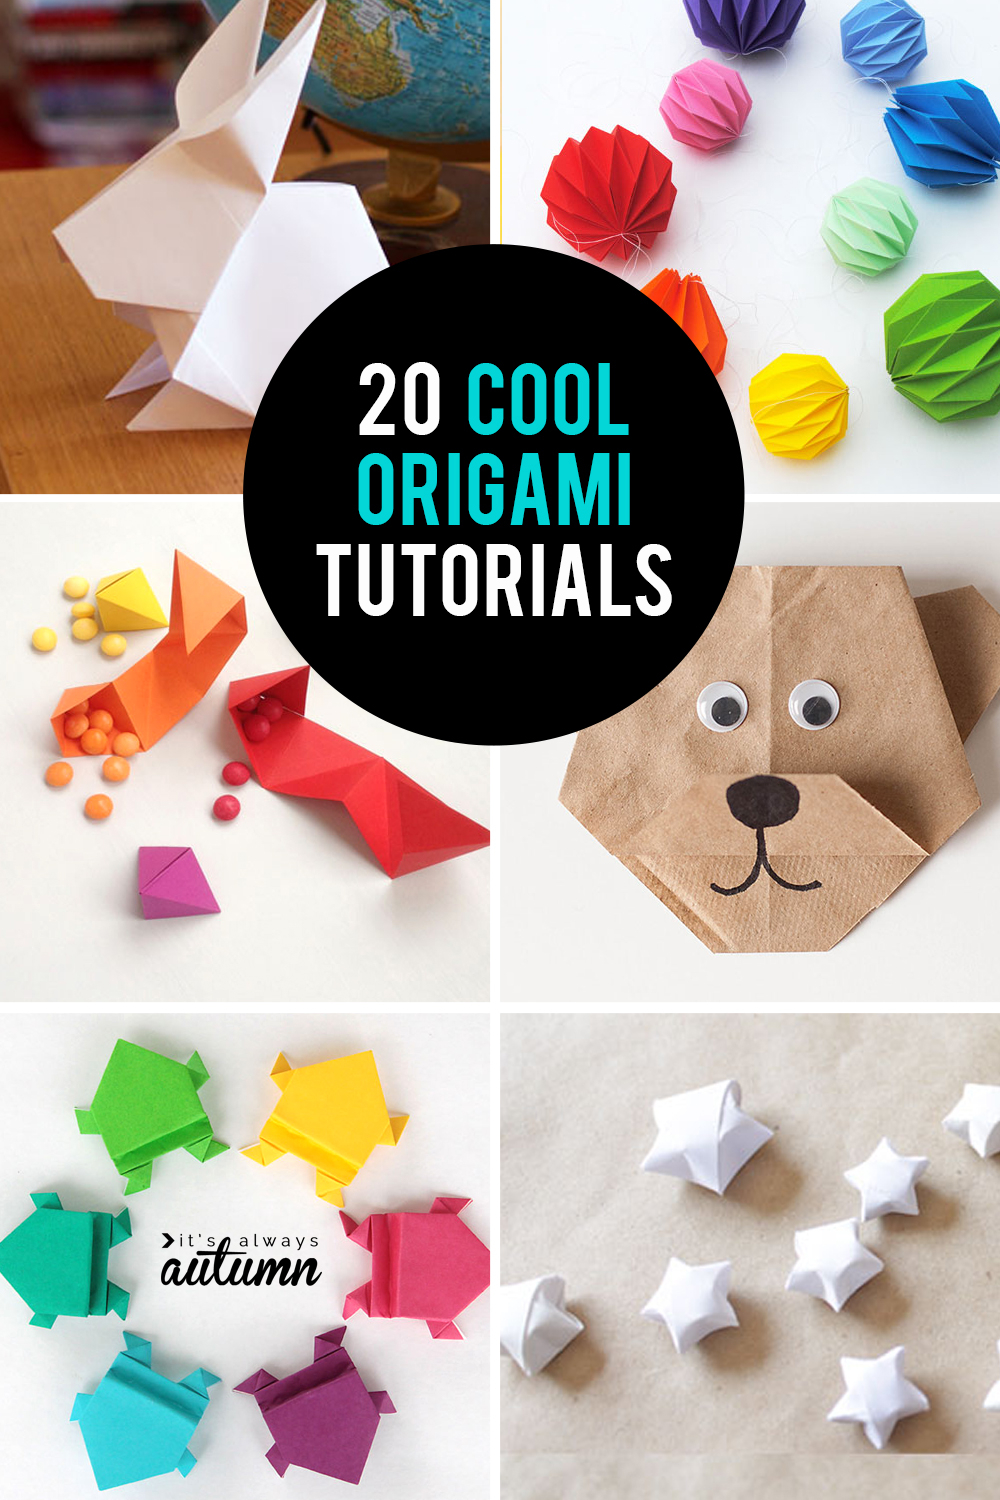 Origami Sphere Easy 20 Cool Origami Tutorials Kids And Adults Will Love Its Always